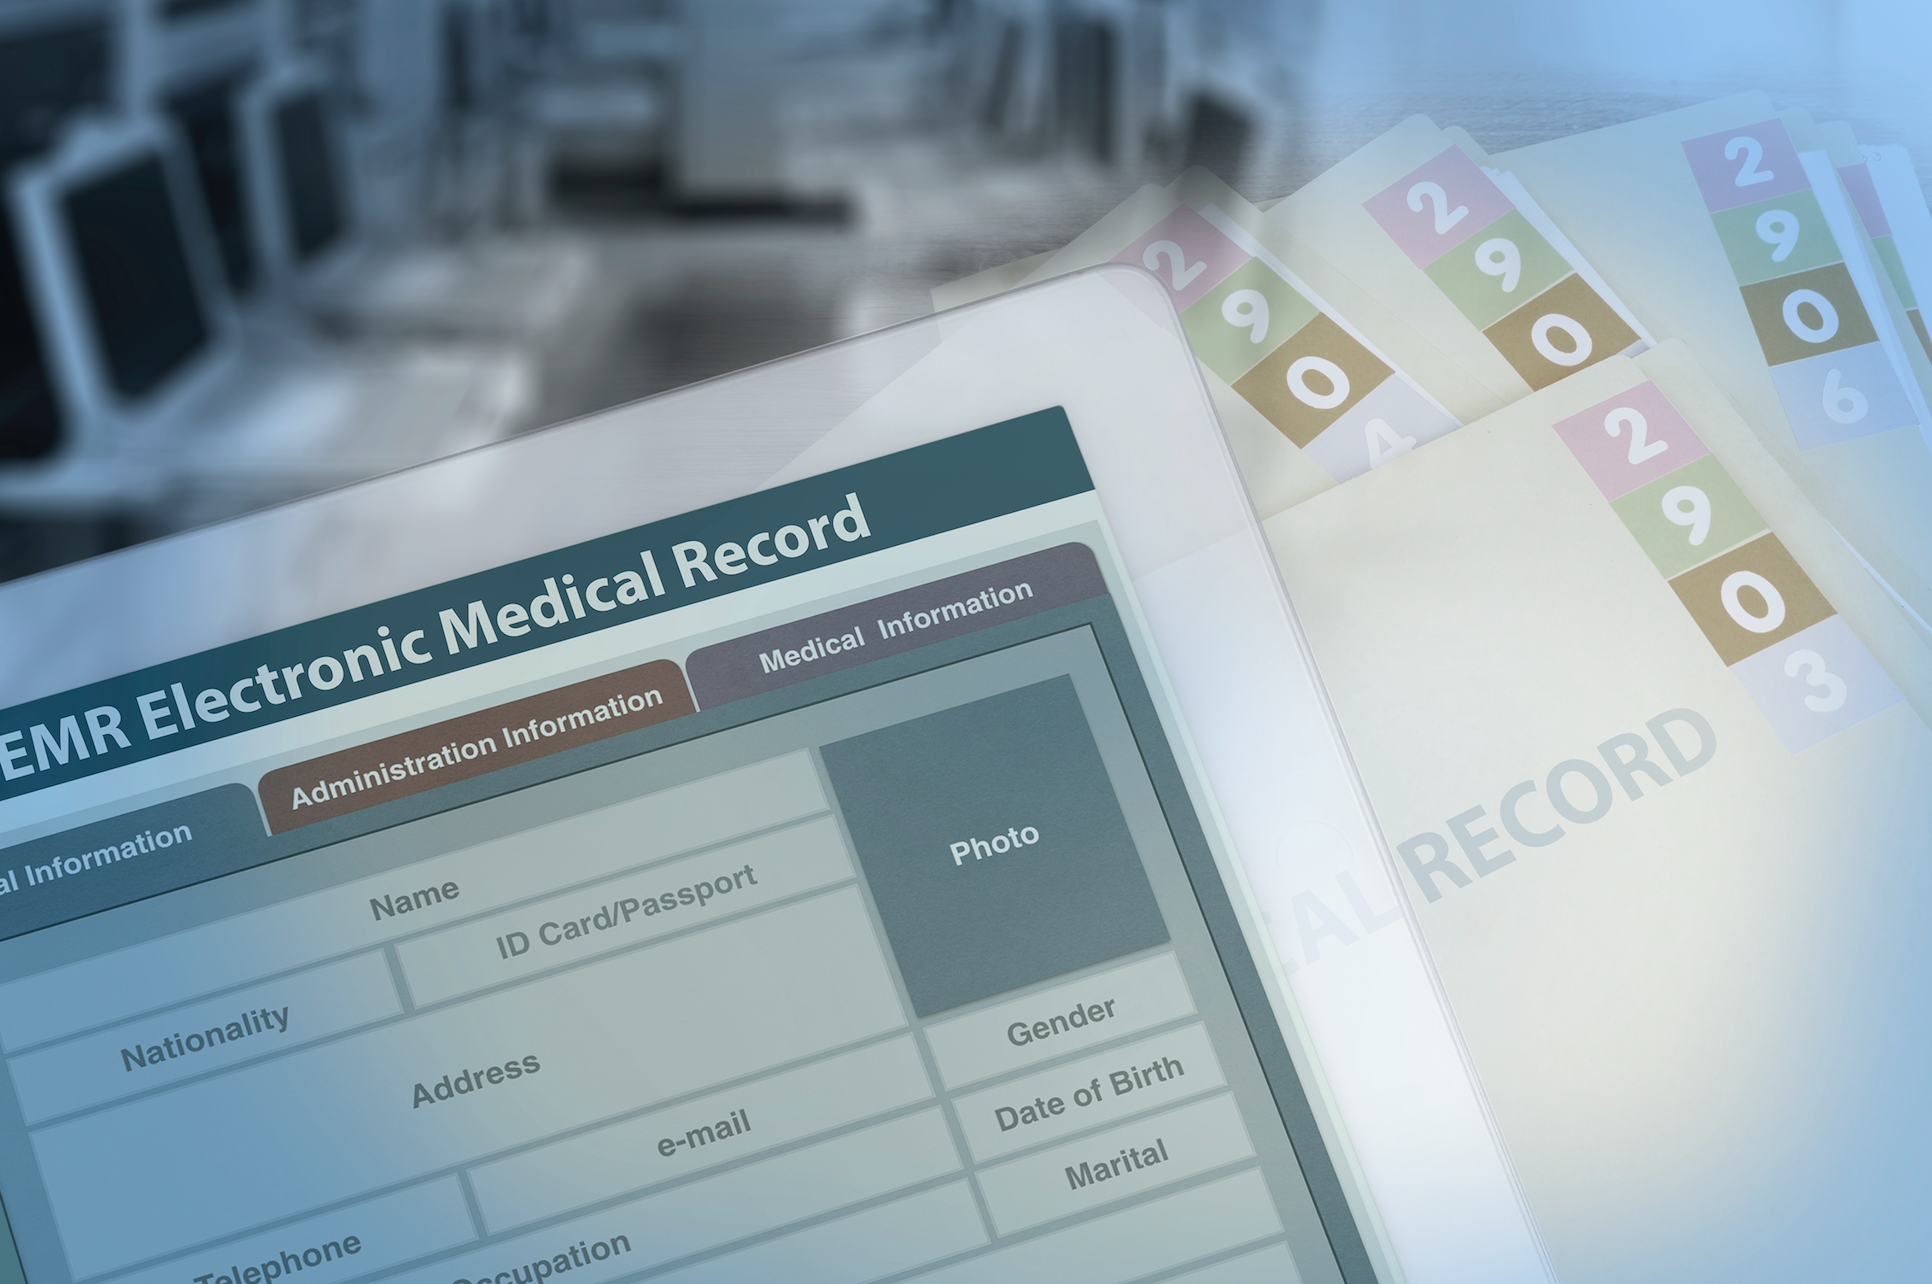 An image of an electronic medical record